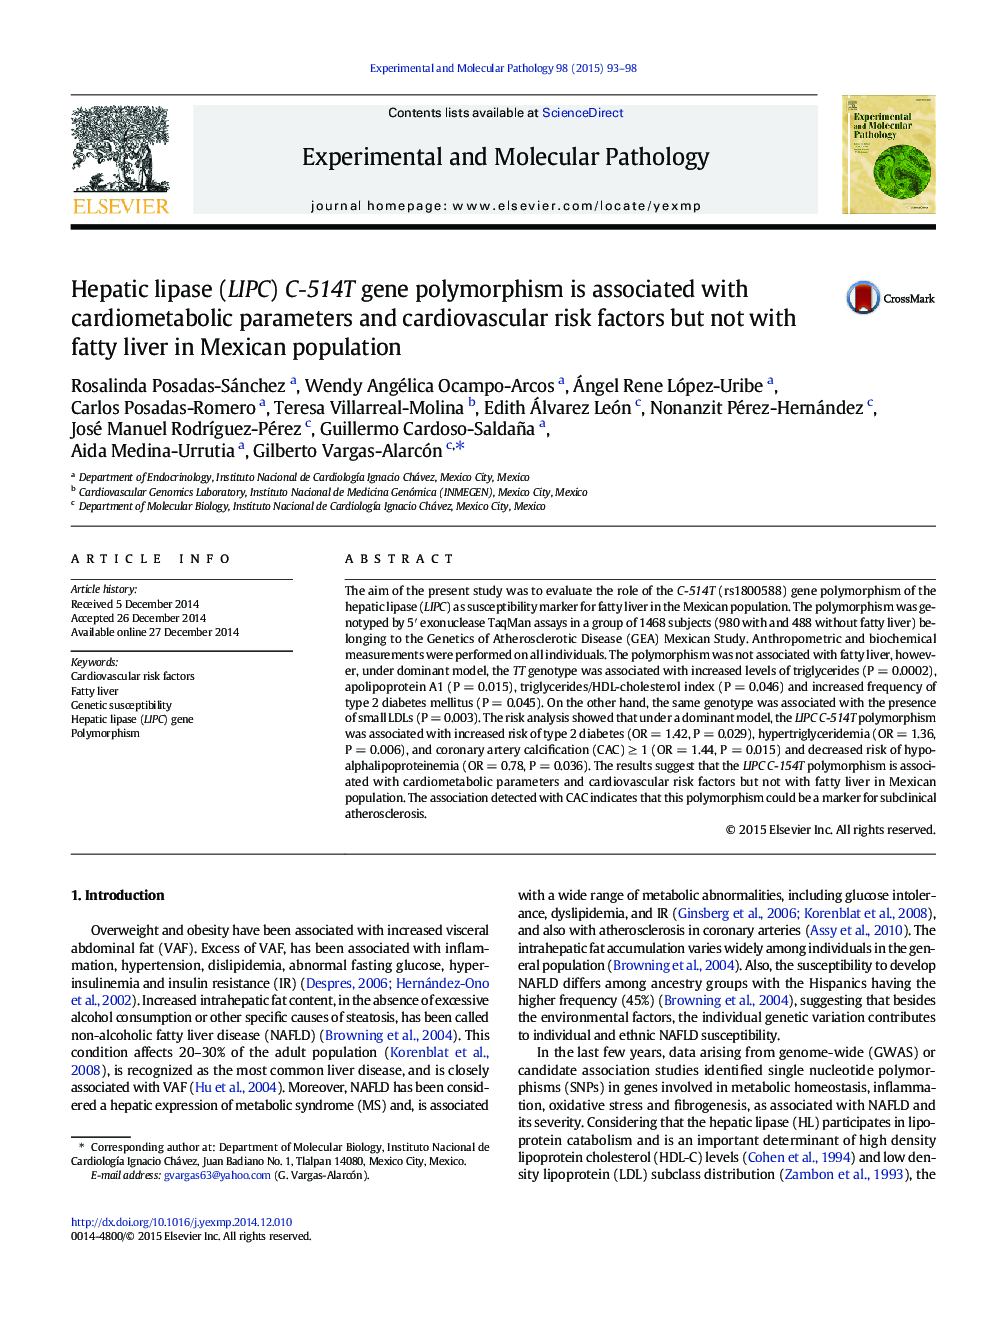 Hepatic lipase (LIPC) C-514T gene polymorphism is associated with cardiometabolic parameters and cardiovascular risk factors but not with fatty liver in Mexican population